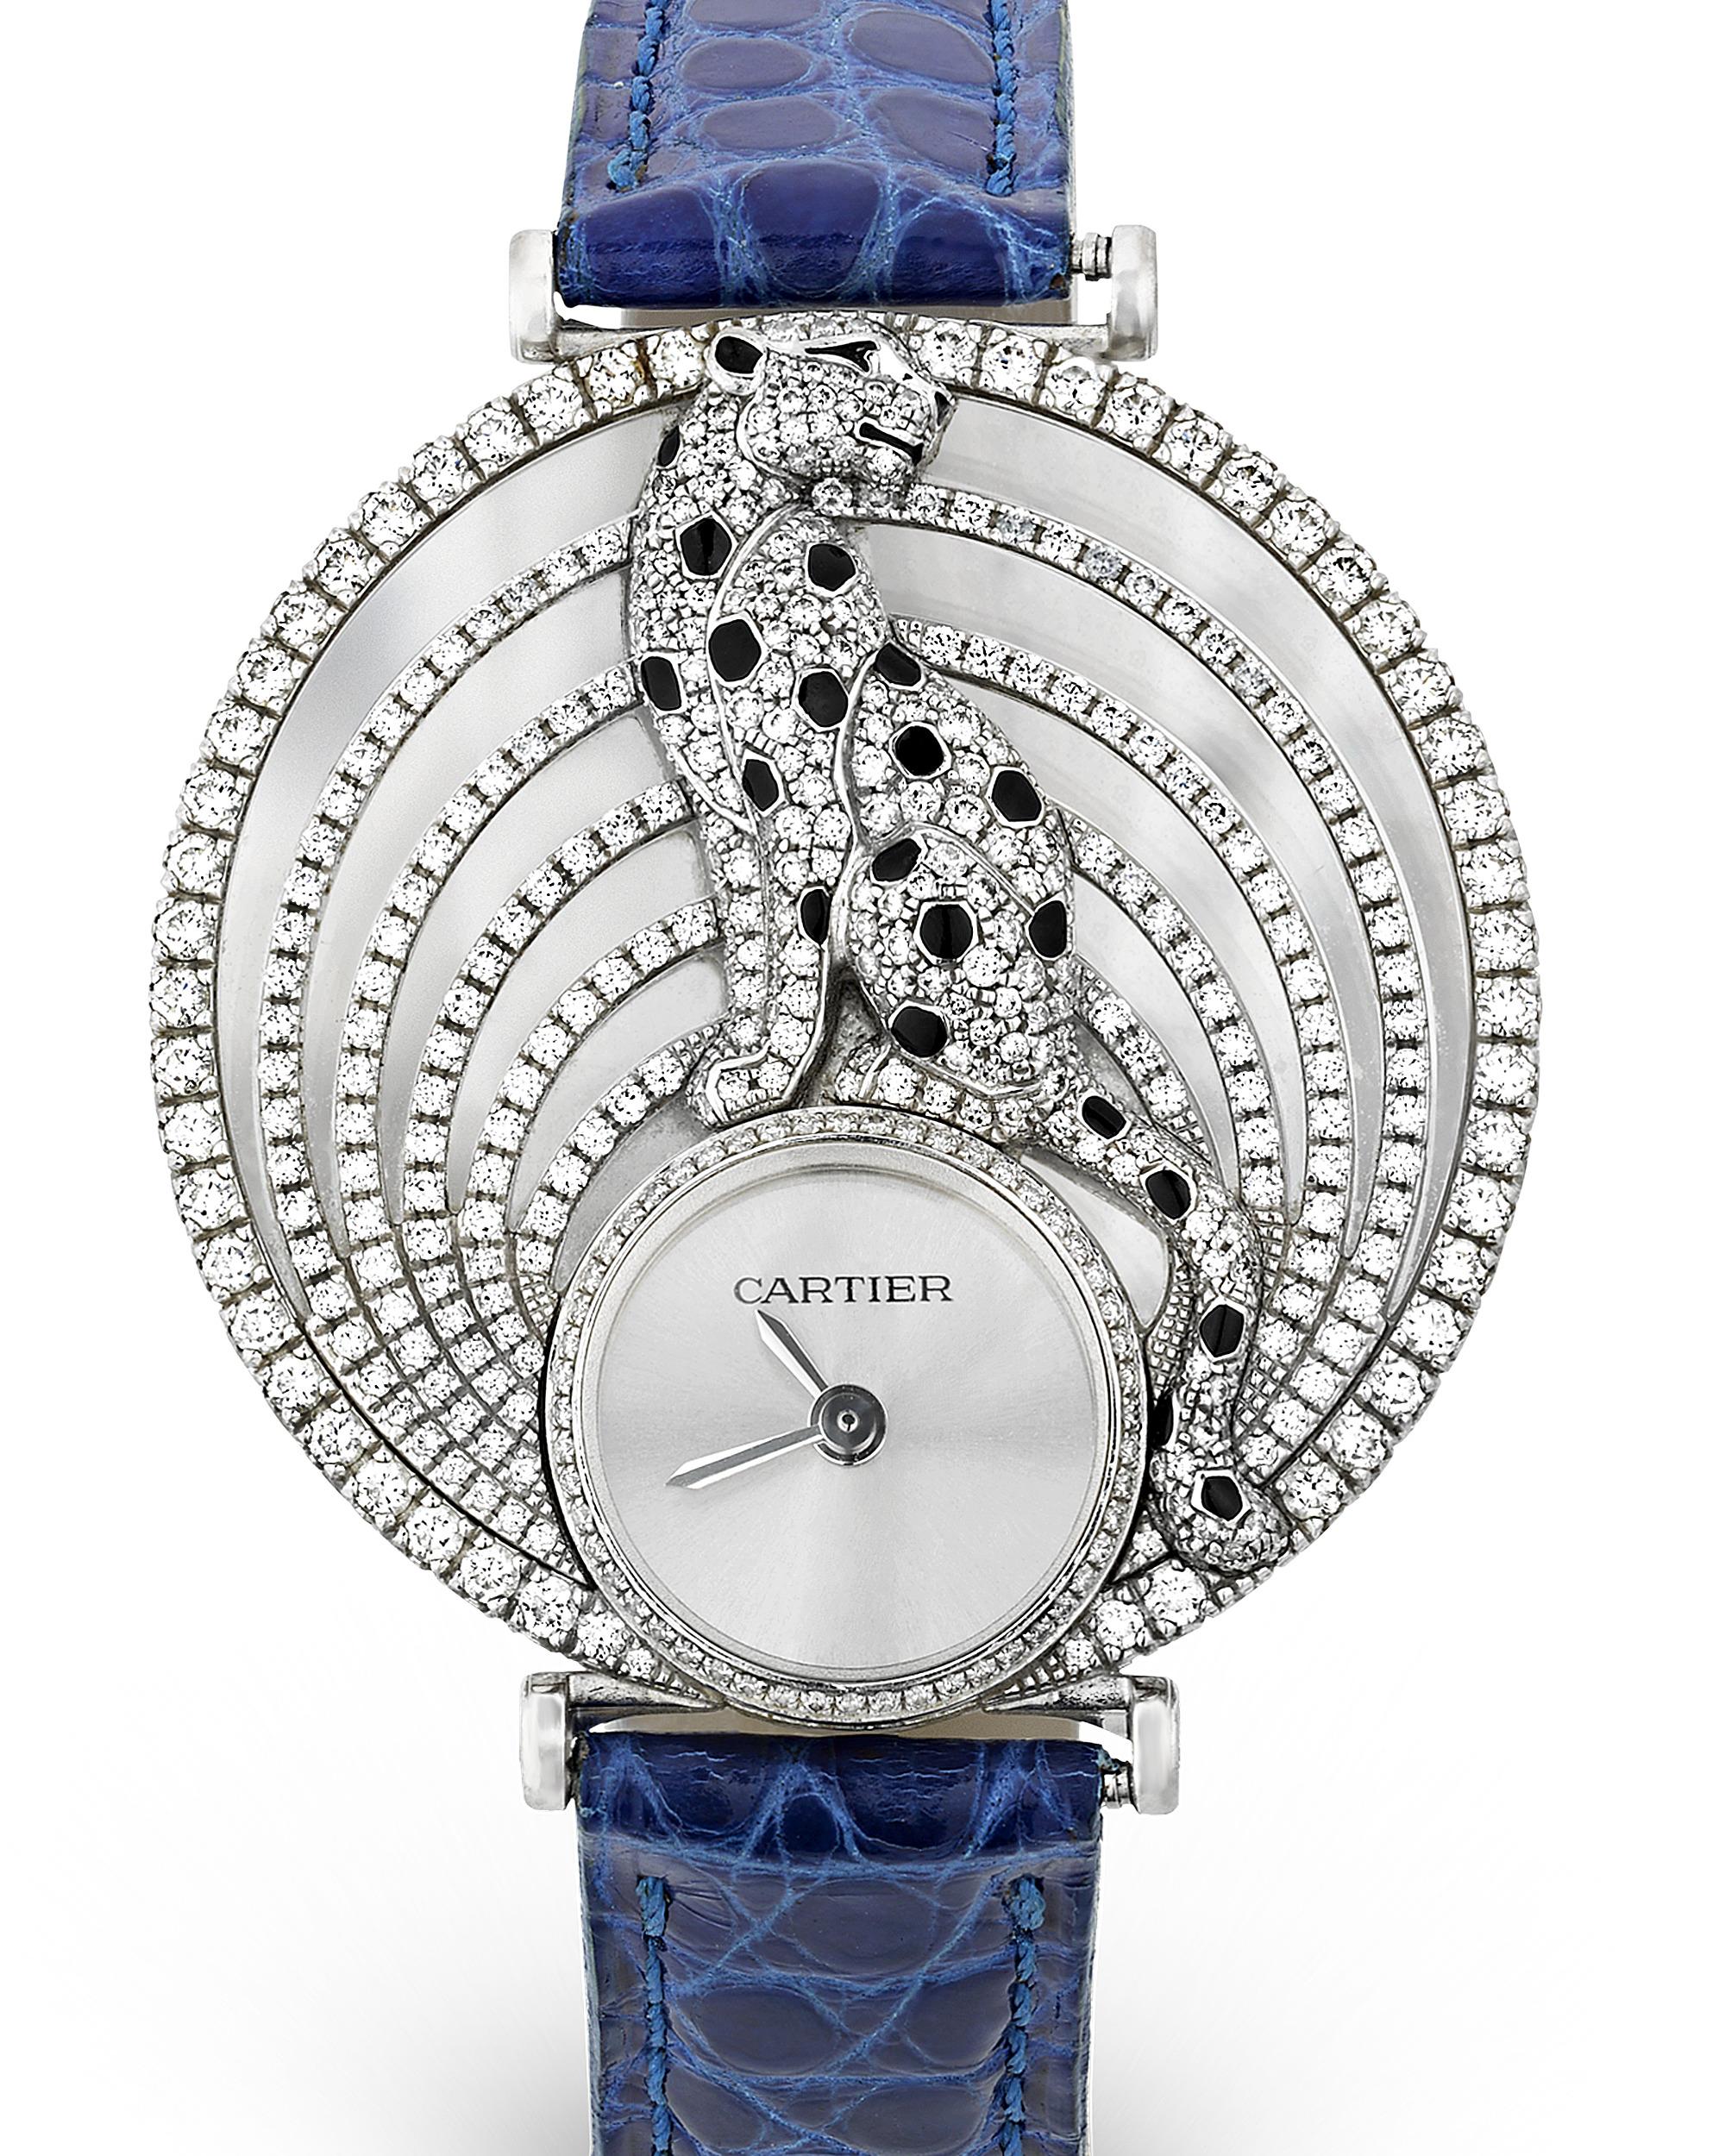 Cartier's signature panthére perches regally atop the face of this wristwatch. Surrounded by six bands of opulent diamonds, the panthére's lacquered spots are visually striking in contrast to the brilliant white diamonds and 18K white gold face.